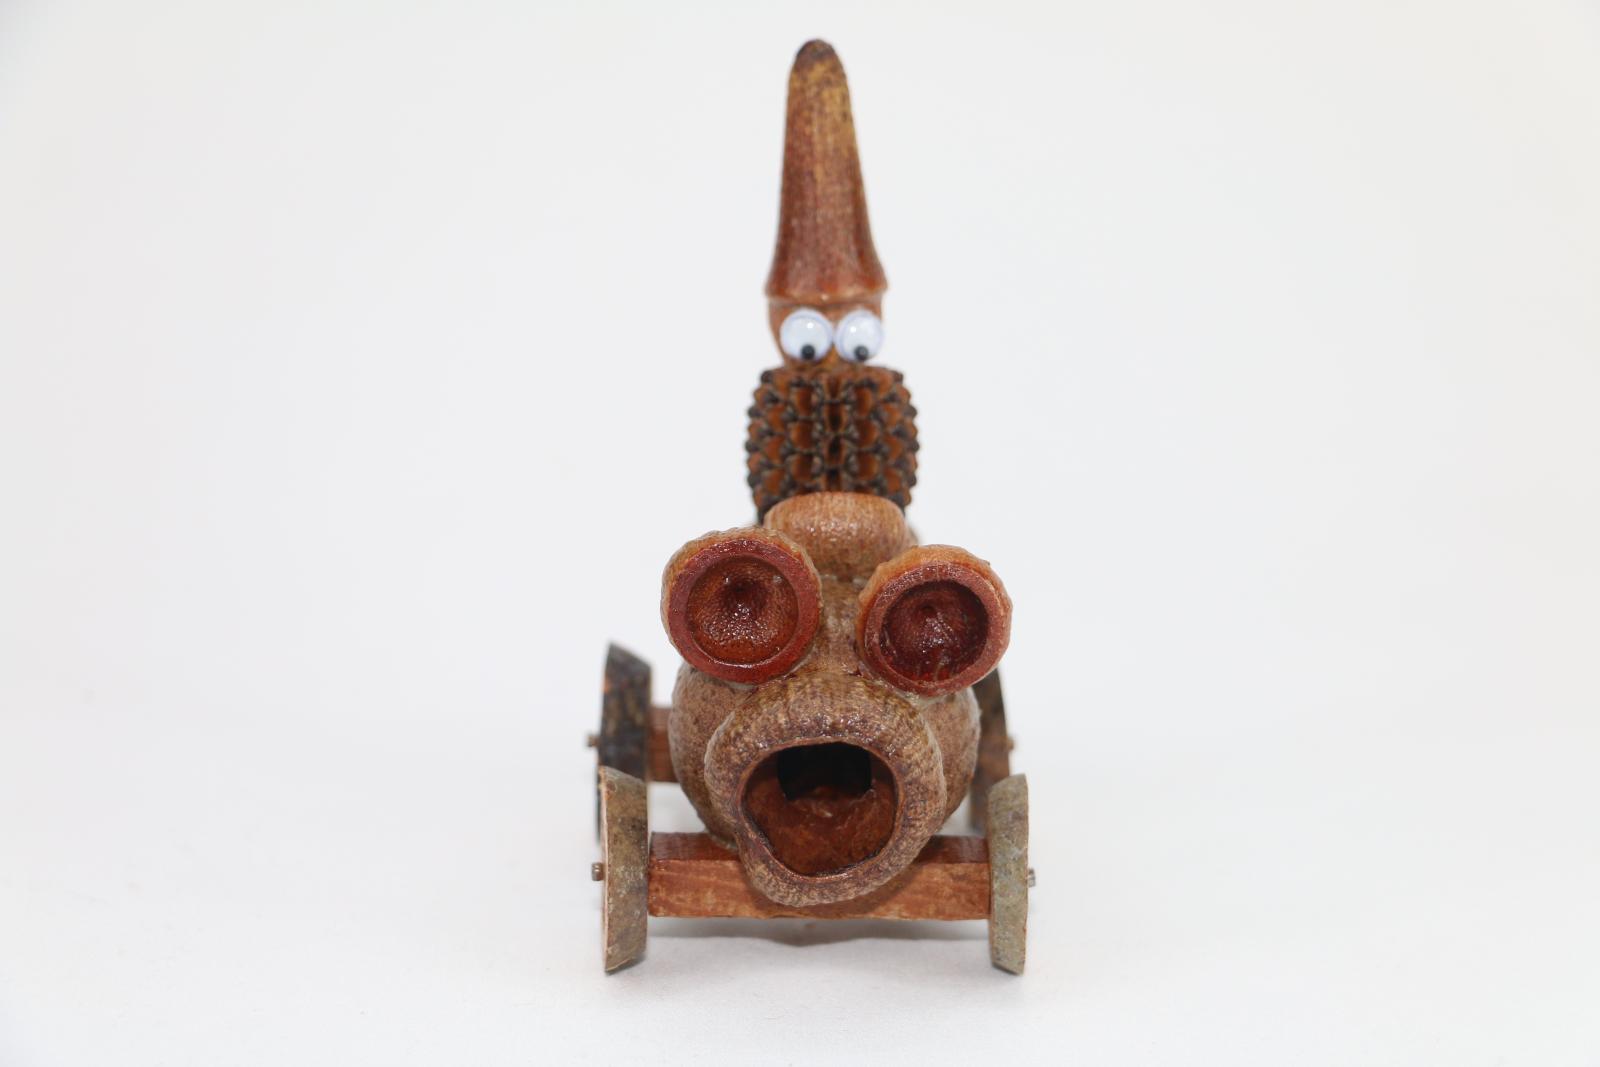 The front view of a Gumnut man with googly eyes, in a car. All made from different plant material.